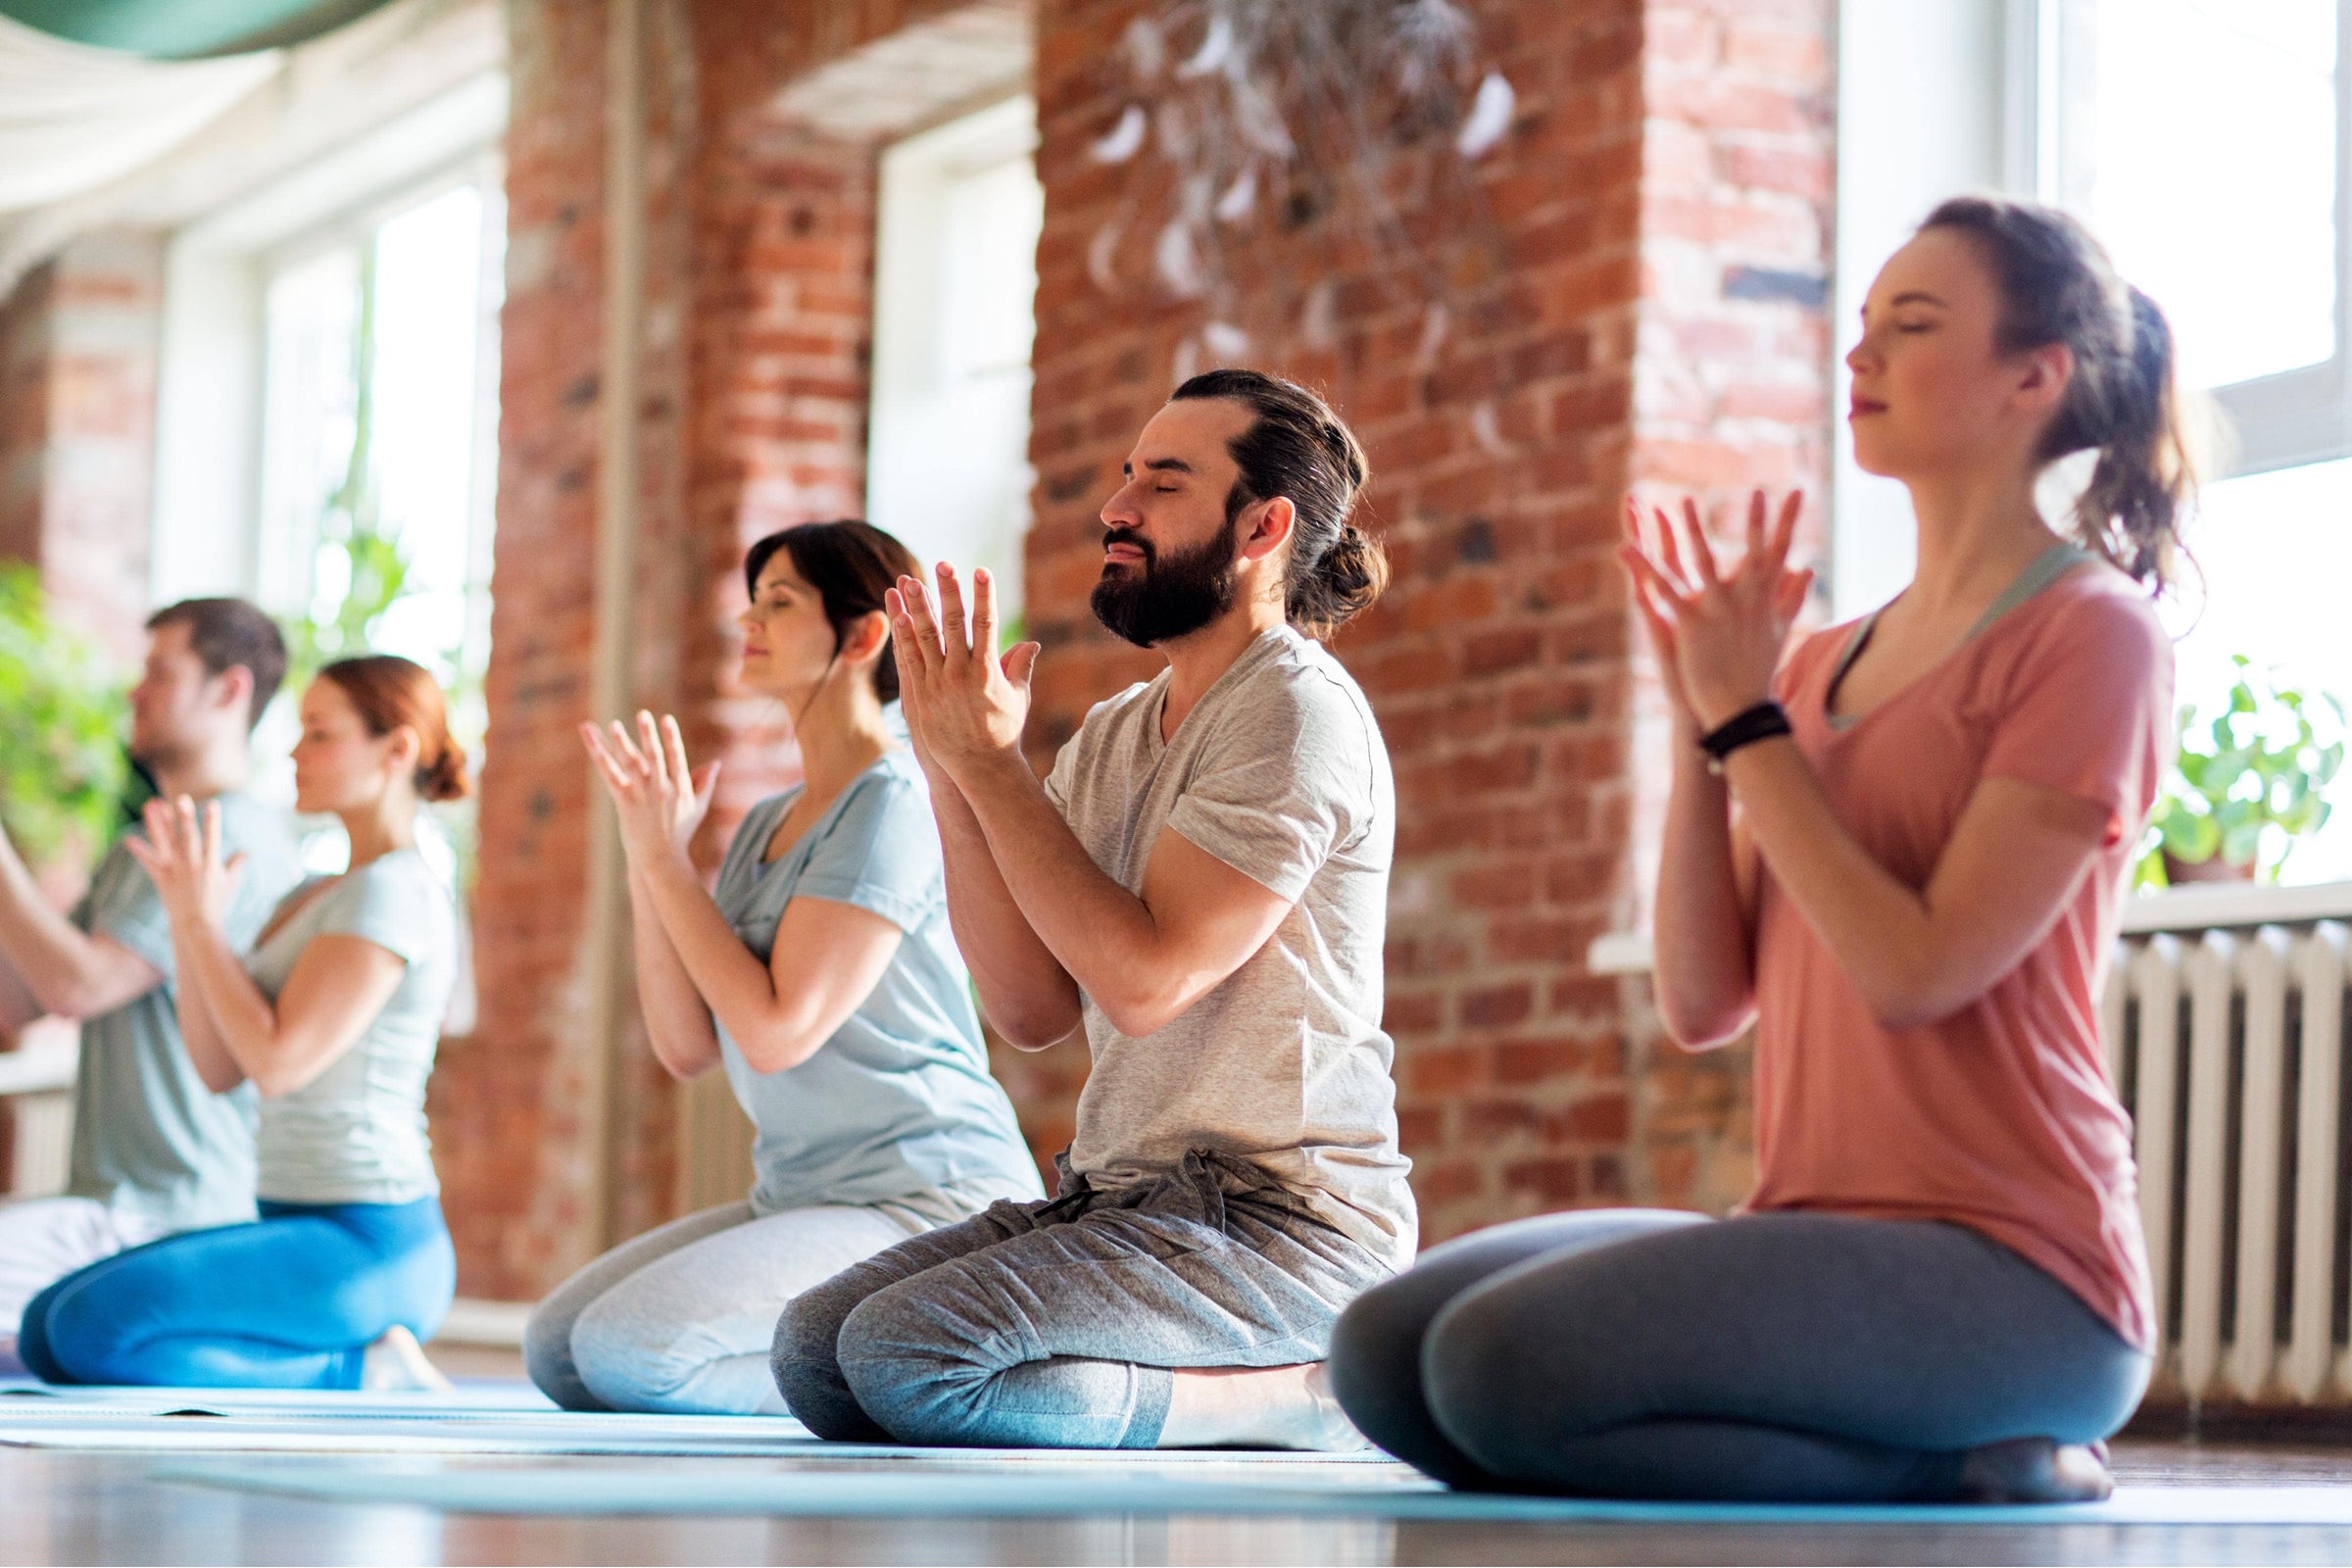 People meditating to reduce stress levels—one of the solutions to how to heal wounds faster